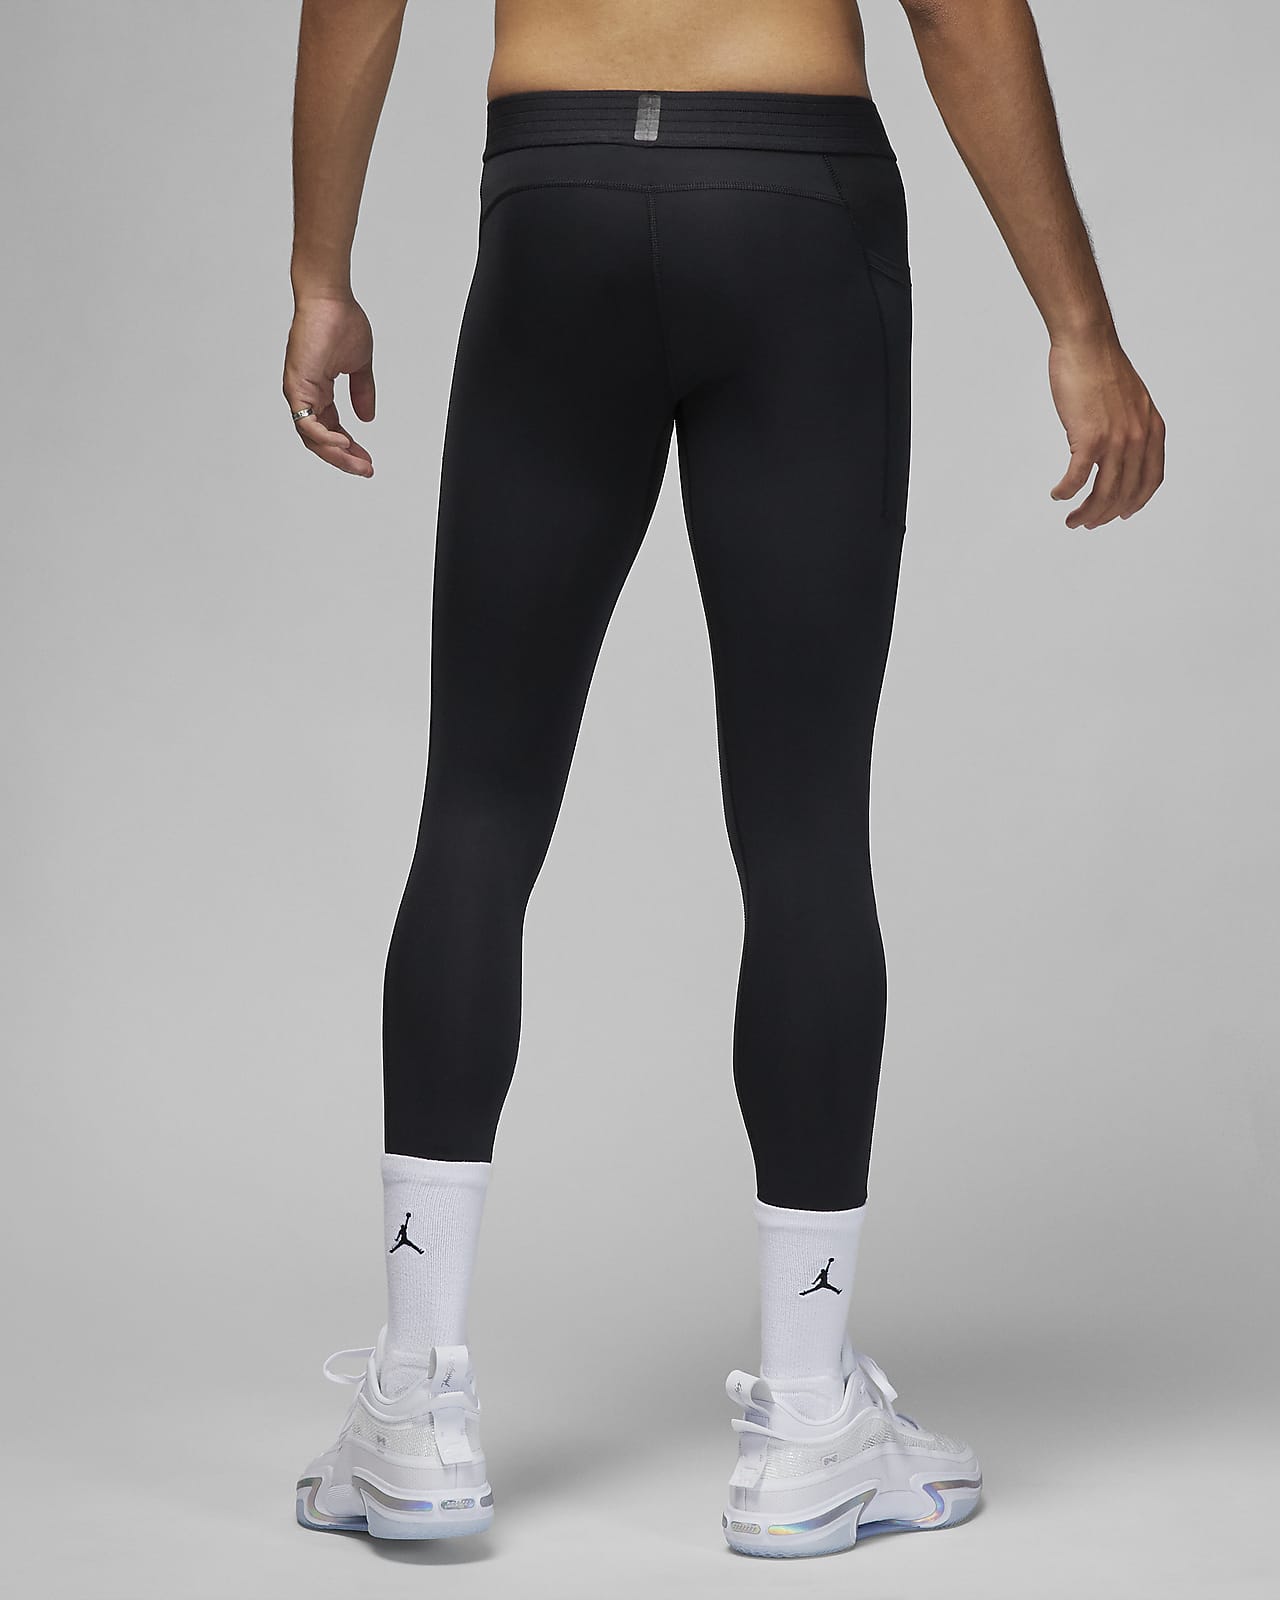 The Best Compression Pants for Basketball in 2023 - The Ultimate Guide